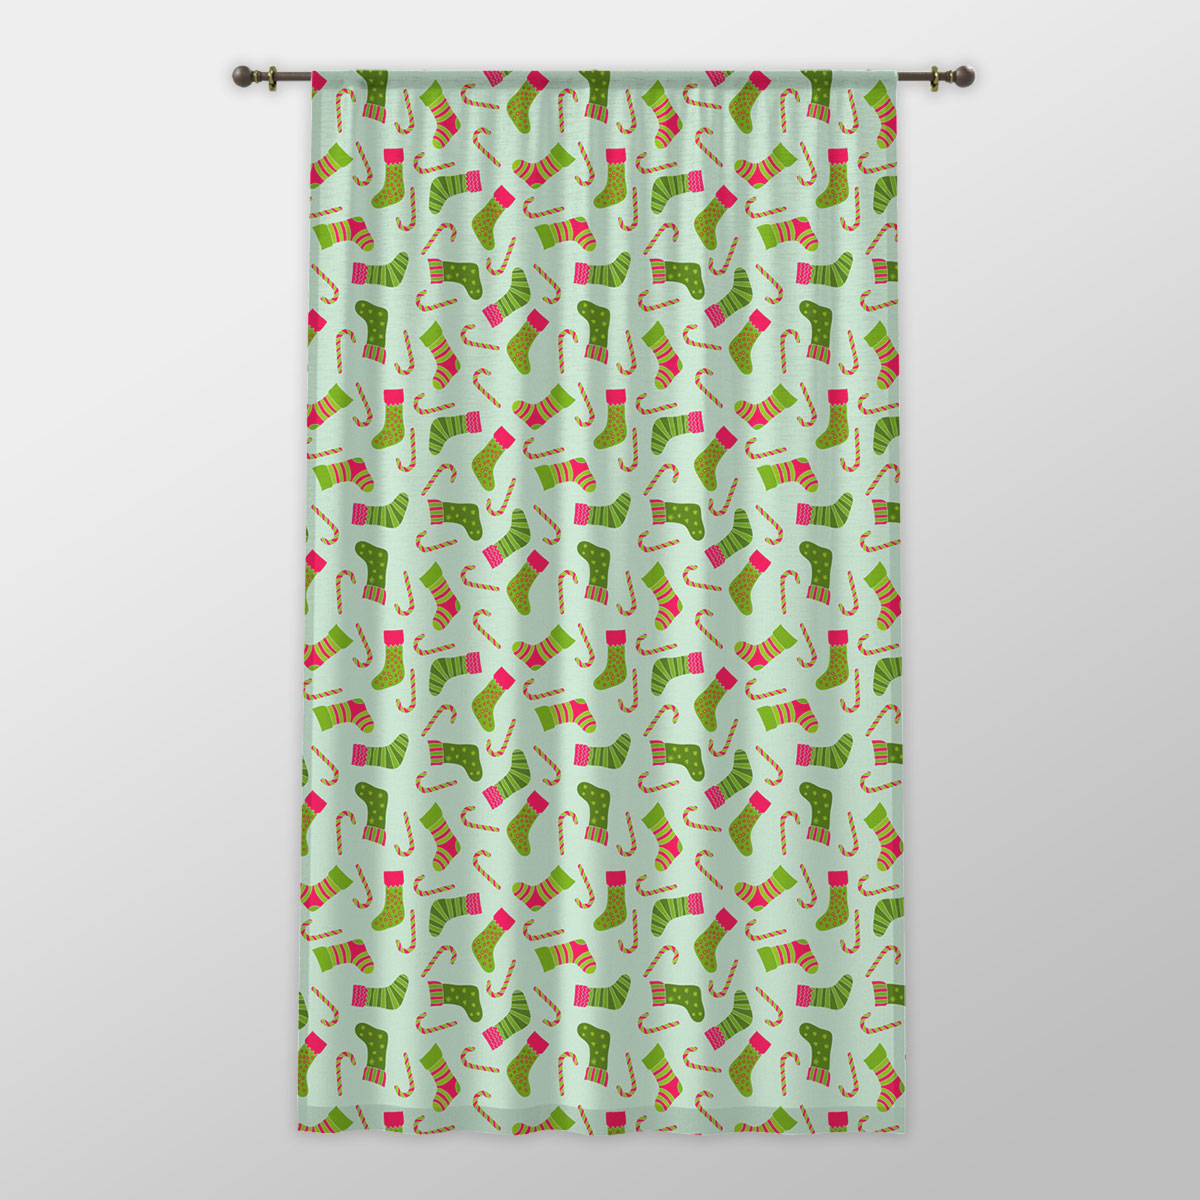 Christmas Socks, Colorful Socks And Candy Canes One-side Printed Window Curtain